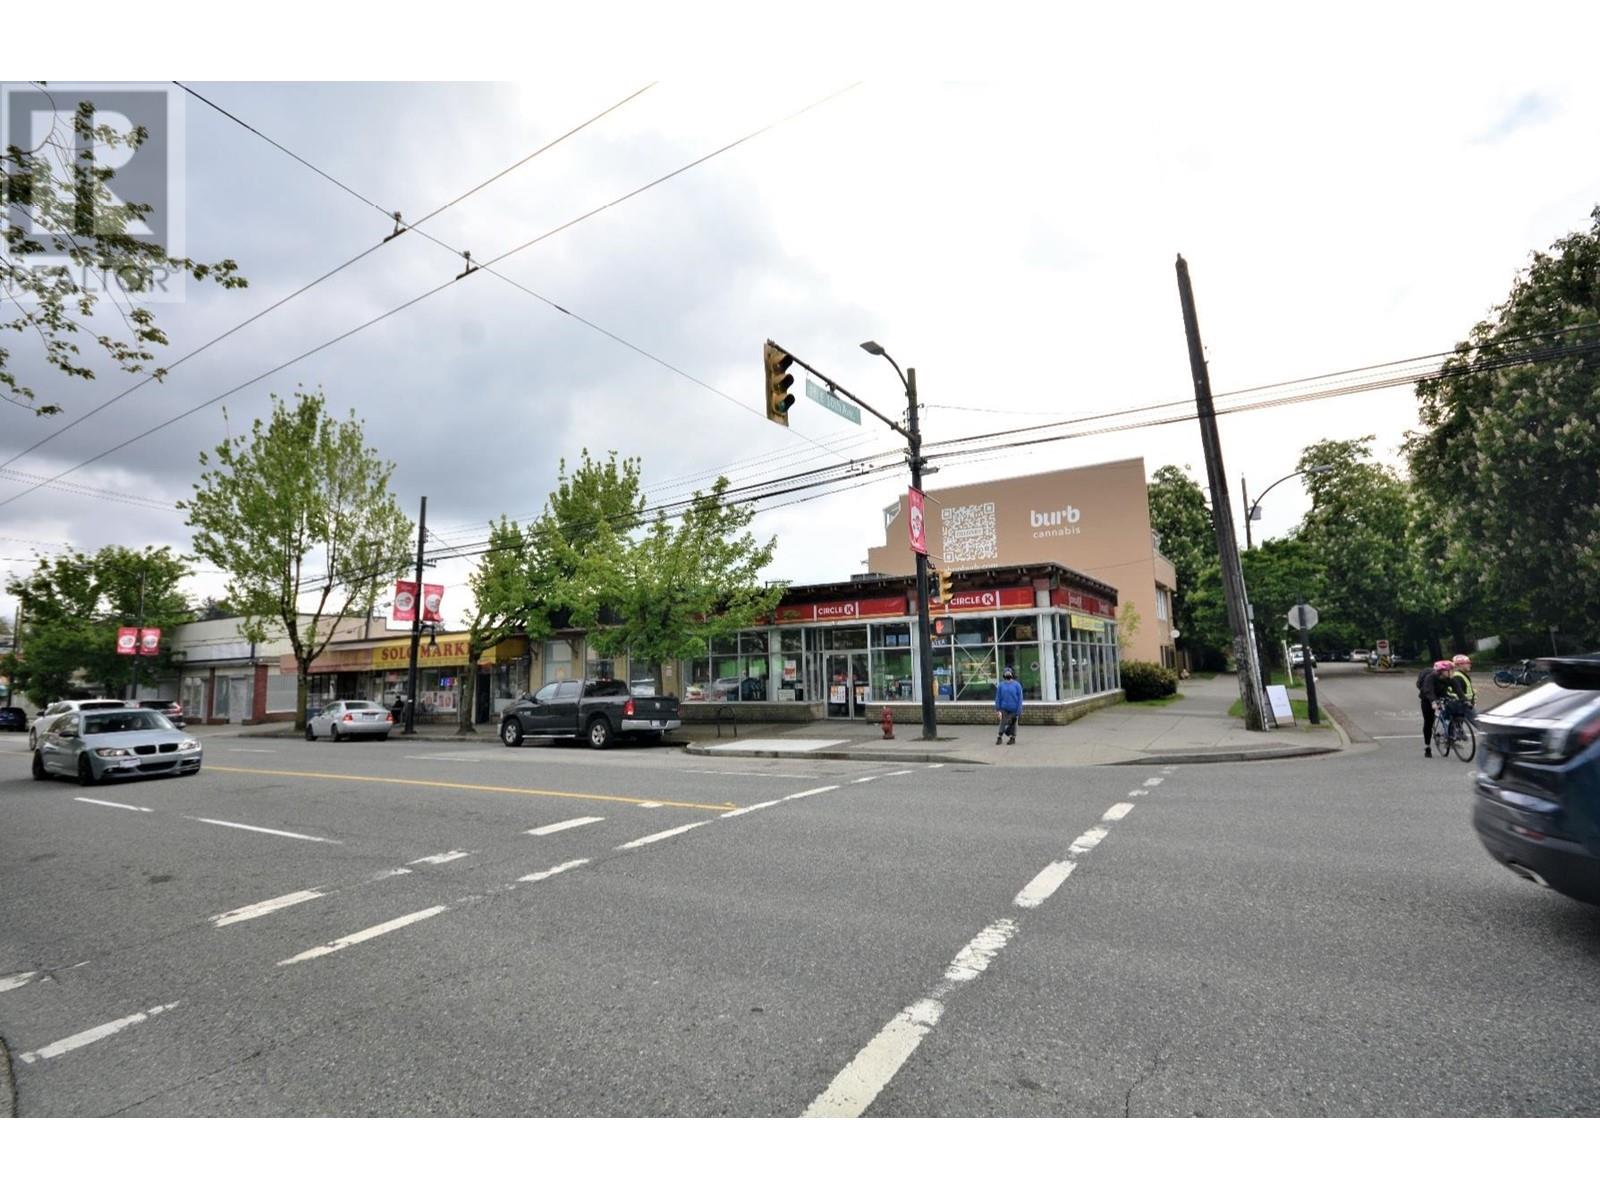 Listing Picture 2 of 4 : 2601 COMMERCIAL DRIVE, Vancouver / 溫哥華 - 魯藝地產 Yvonne Lu Group - MLS Medallion Club Member